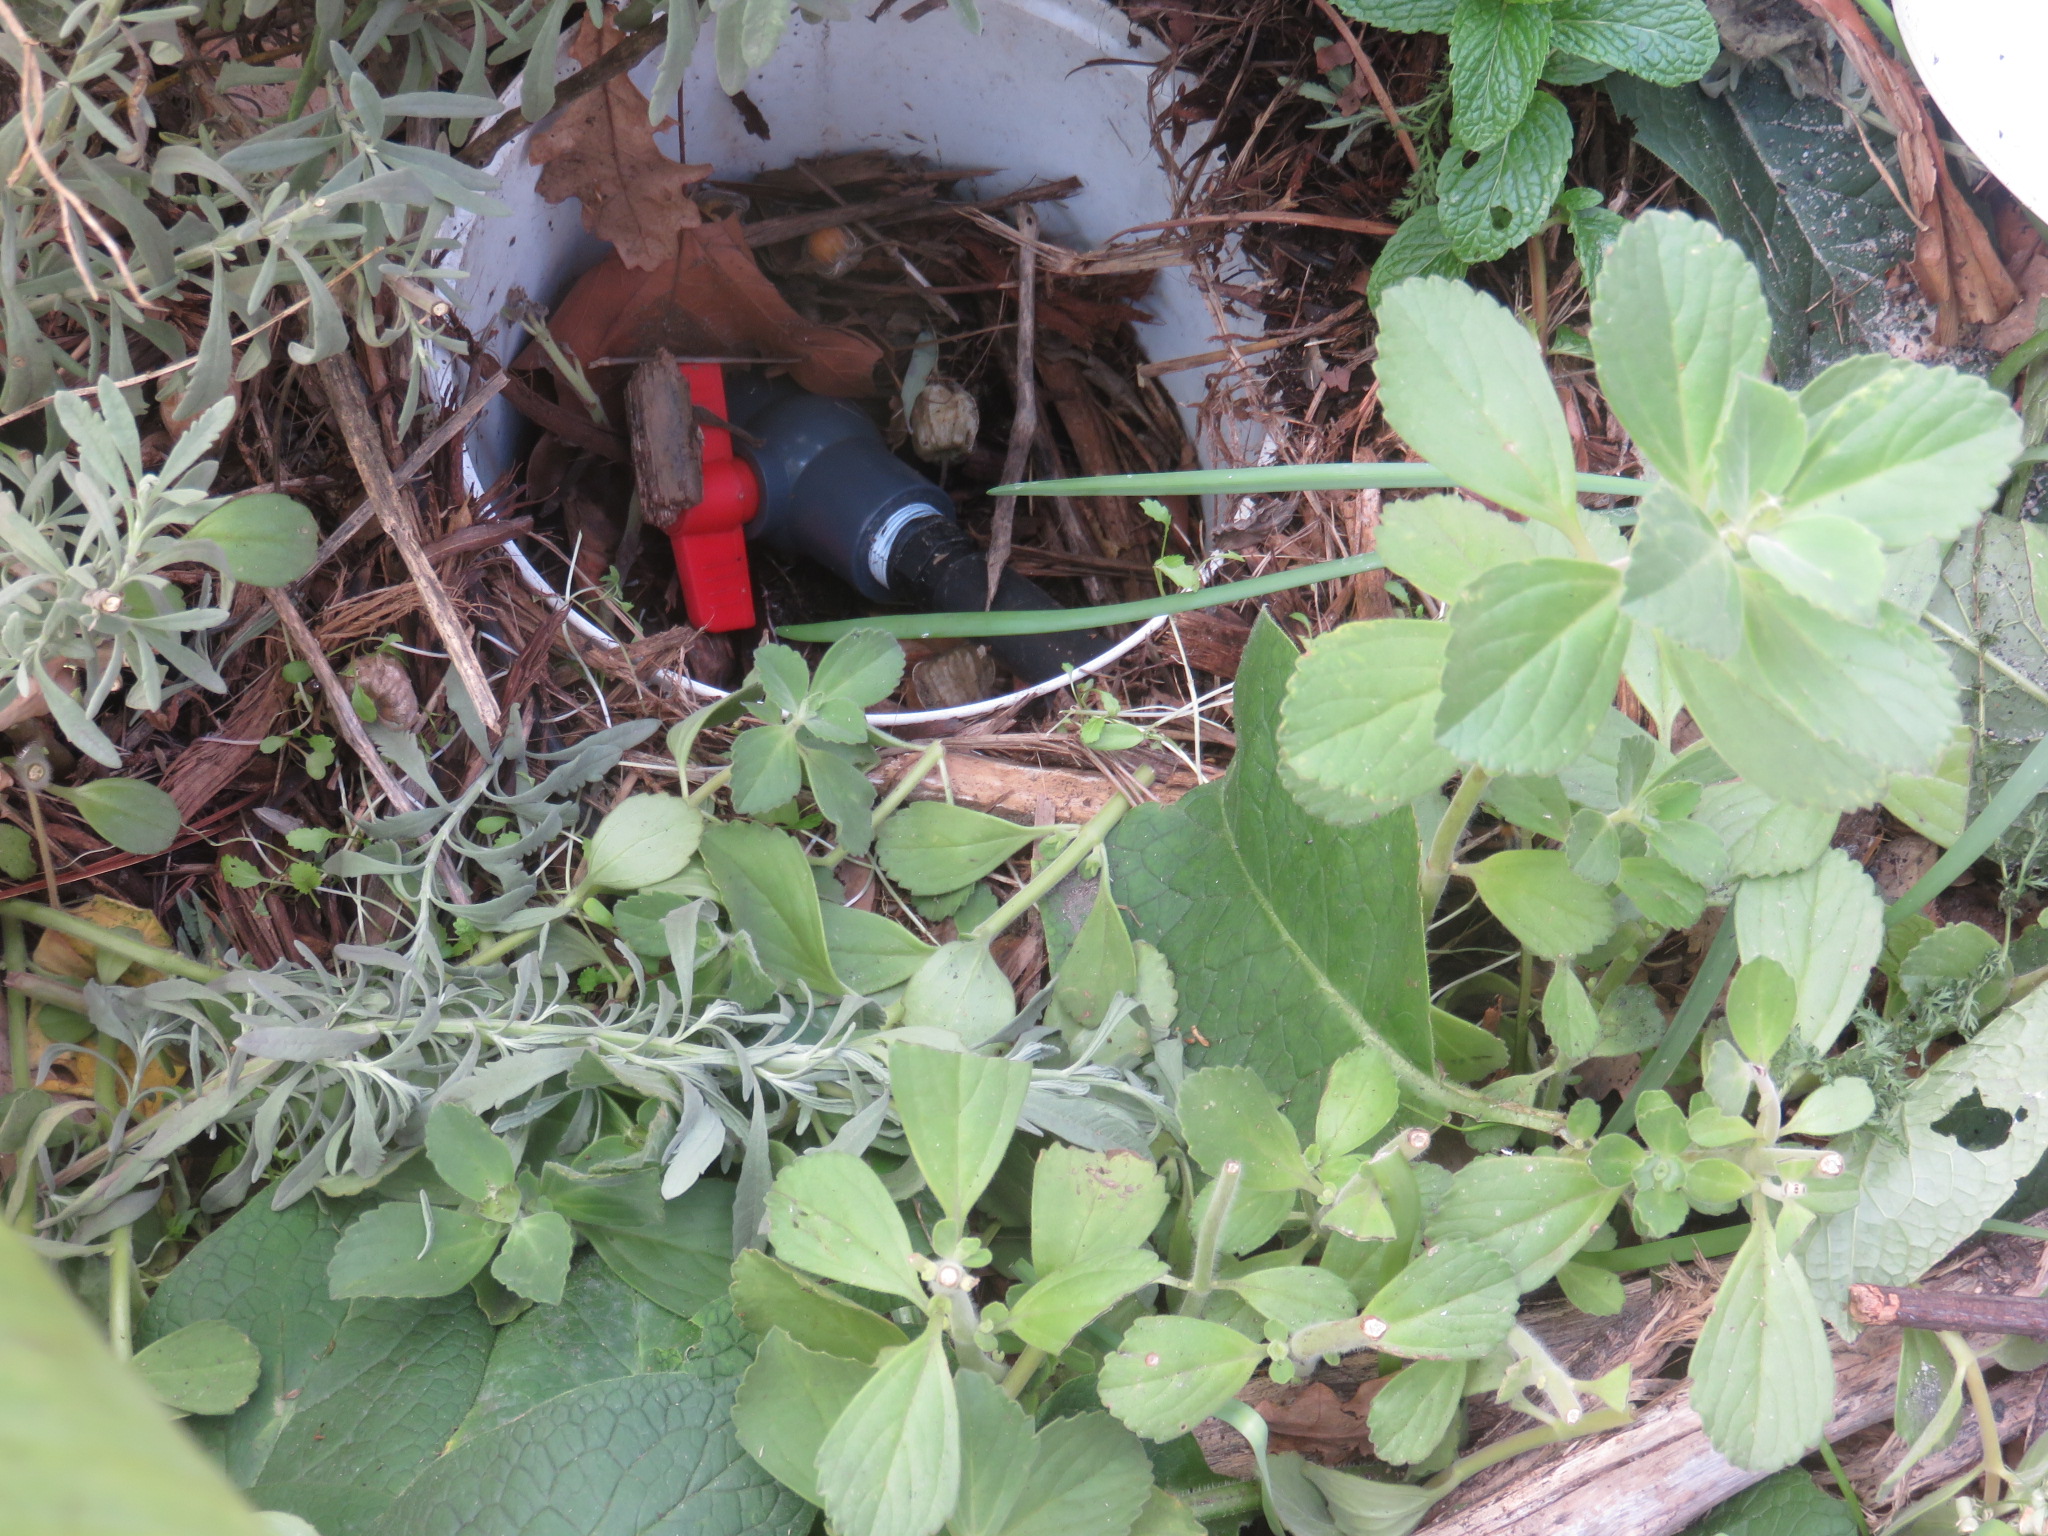 outlet valve protected by bucket buried in mulch pit